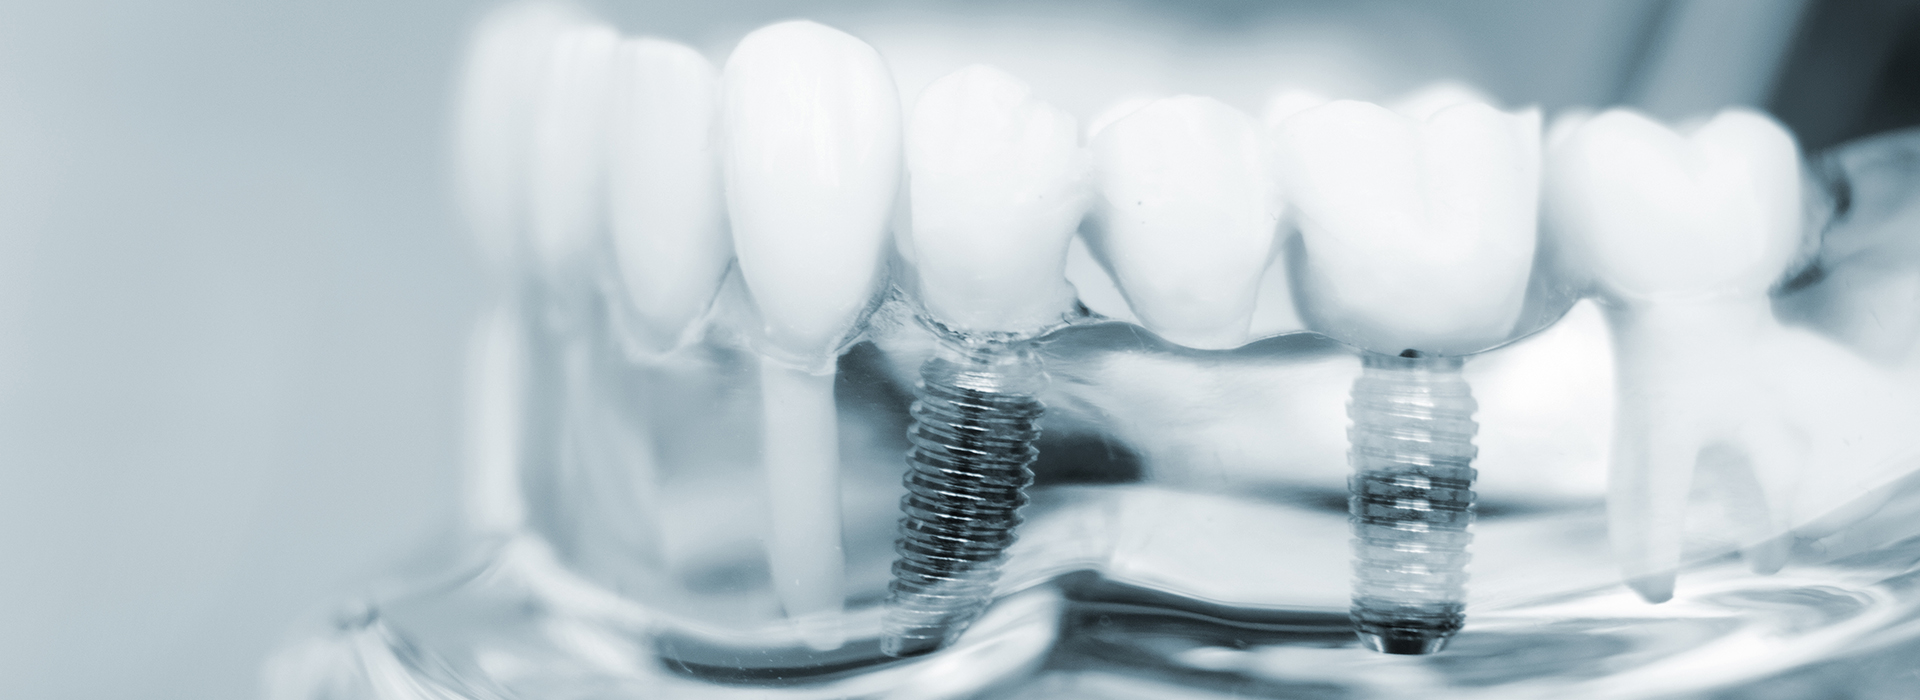 Bronx Wellness Family Dental | Implant Dentistry, Extractions and Veneers